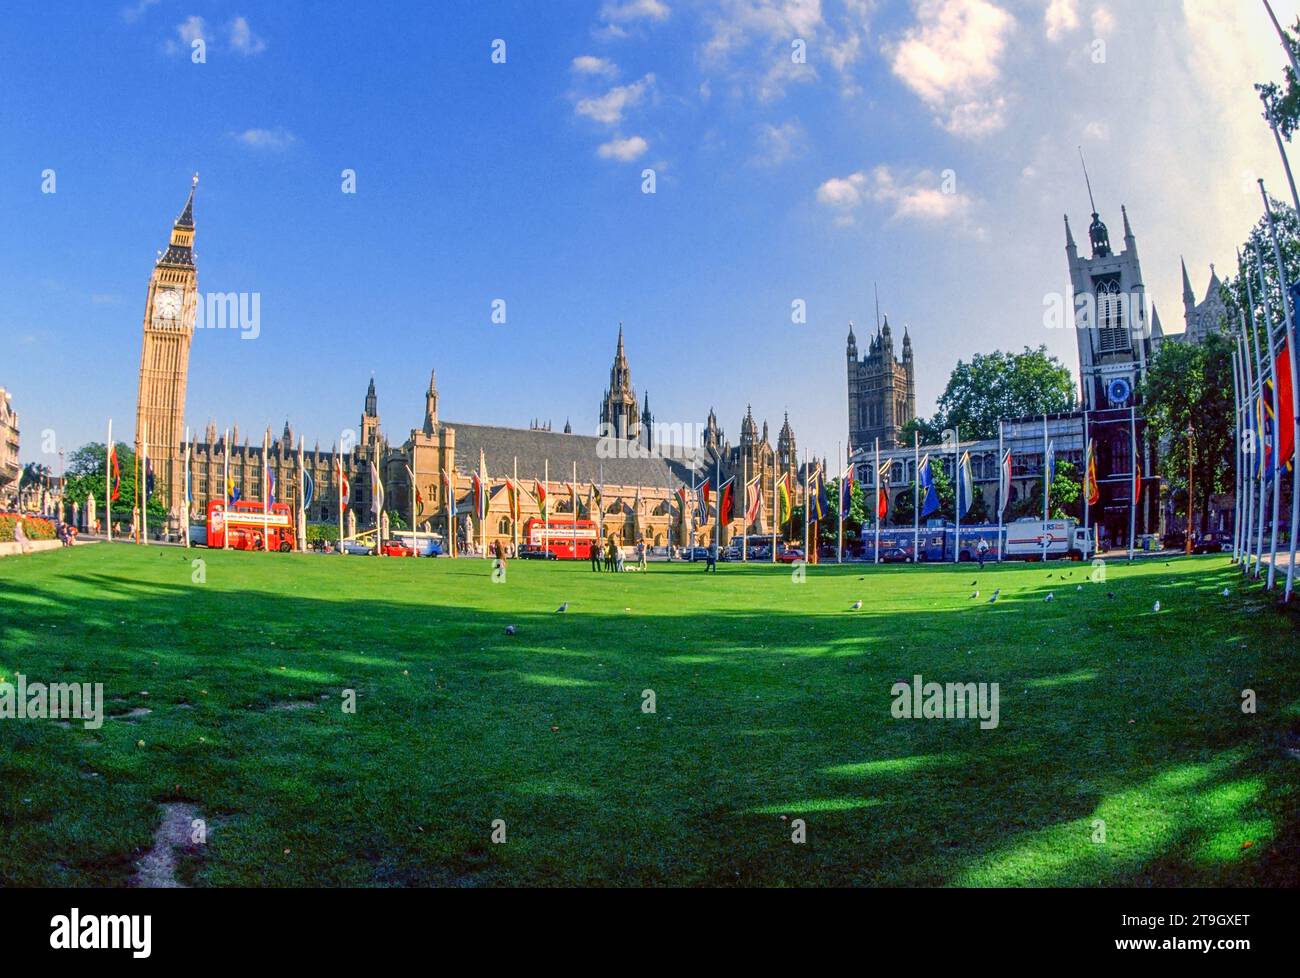 Commonwealth Park. Palace of Westminster. House of Parliament Building. Elizabeth Tower. Big Ben.London, England. Stock Photo